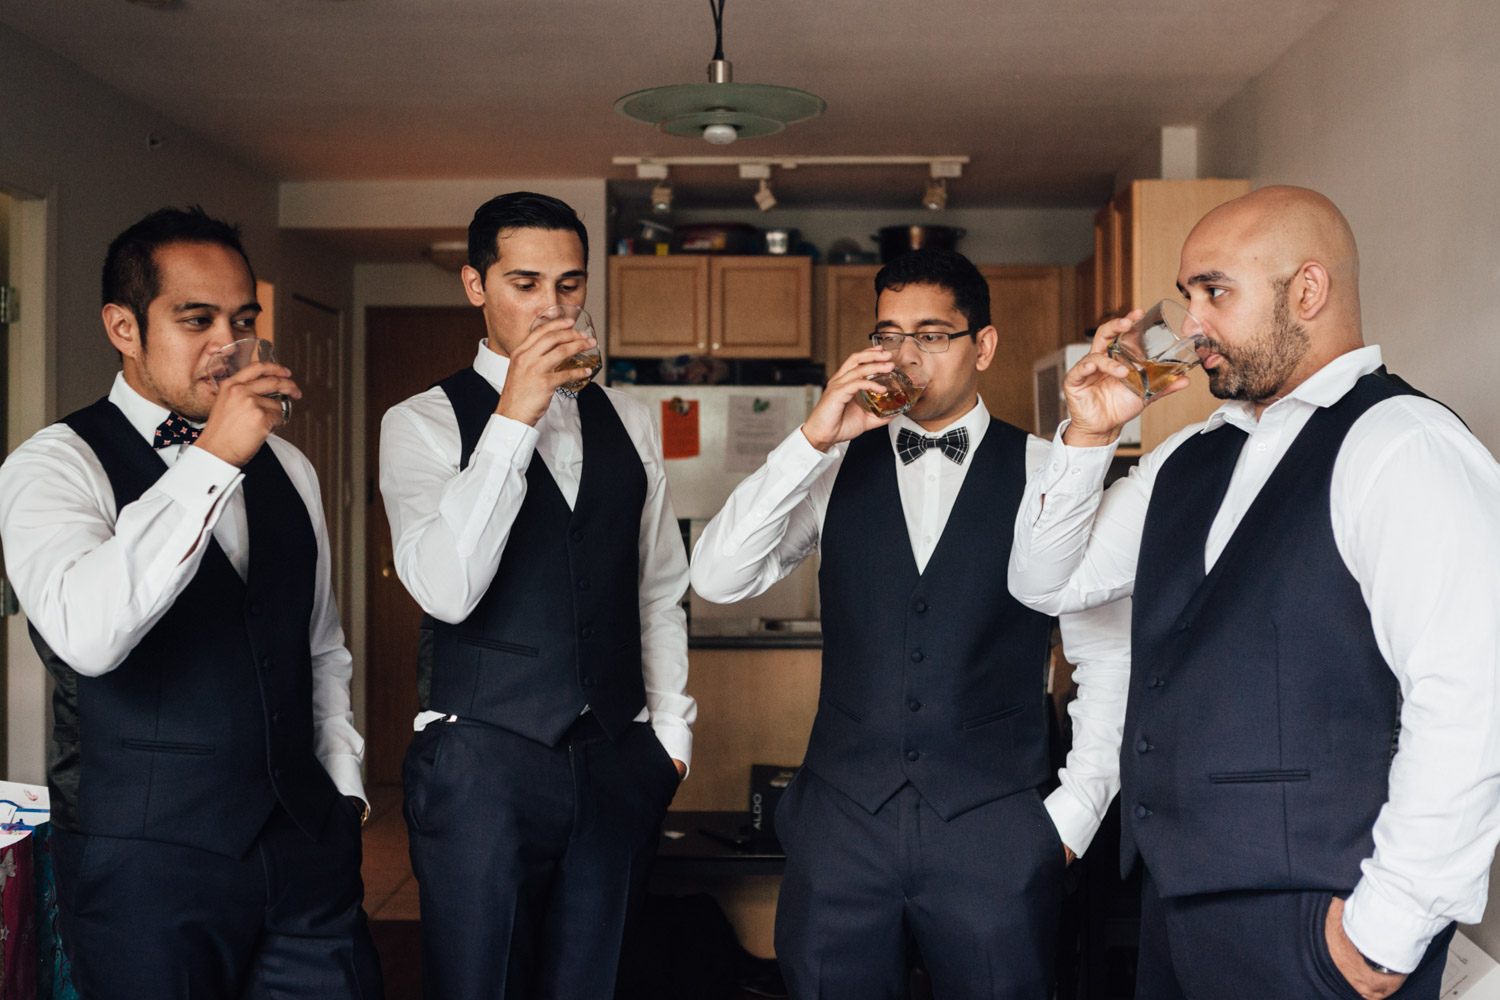 whiskey cheers with groom and groomsmen vancouver wedding photography